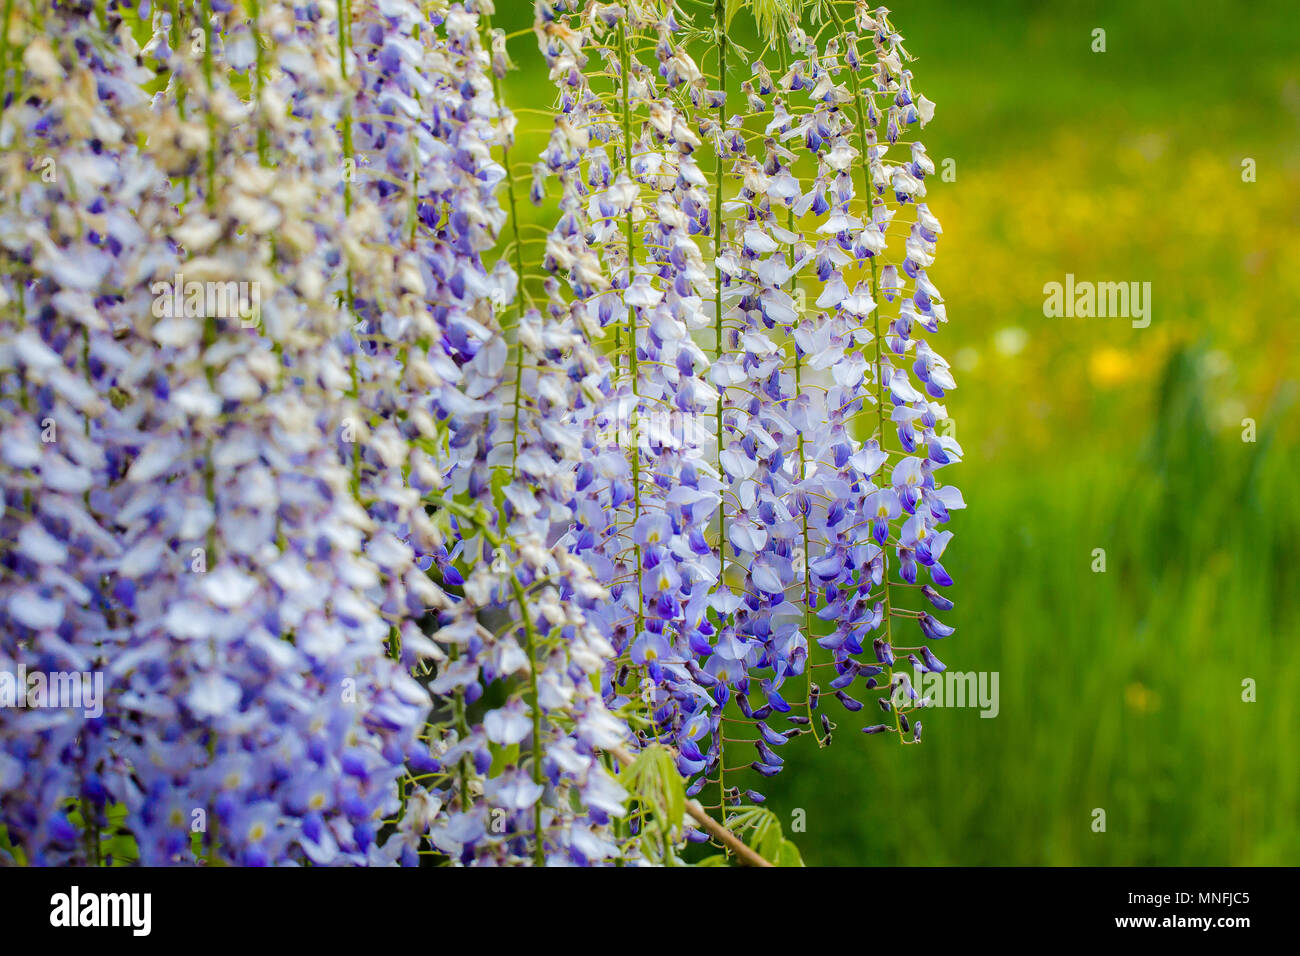 Wisteria, Japanese Wisteria, hanging white blue purple flowers on green grass background. Close up full frame horizontal background Stock Photo